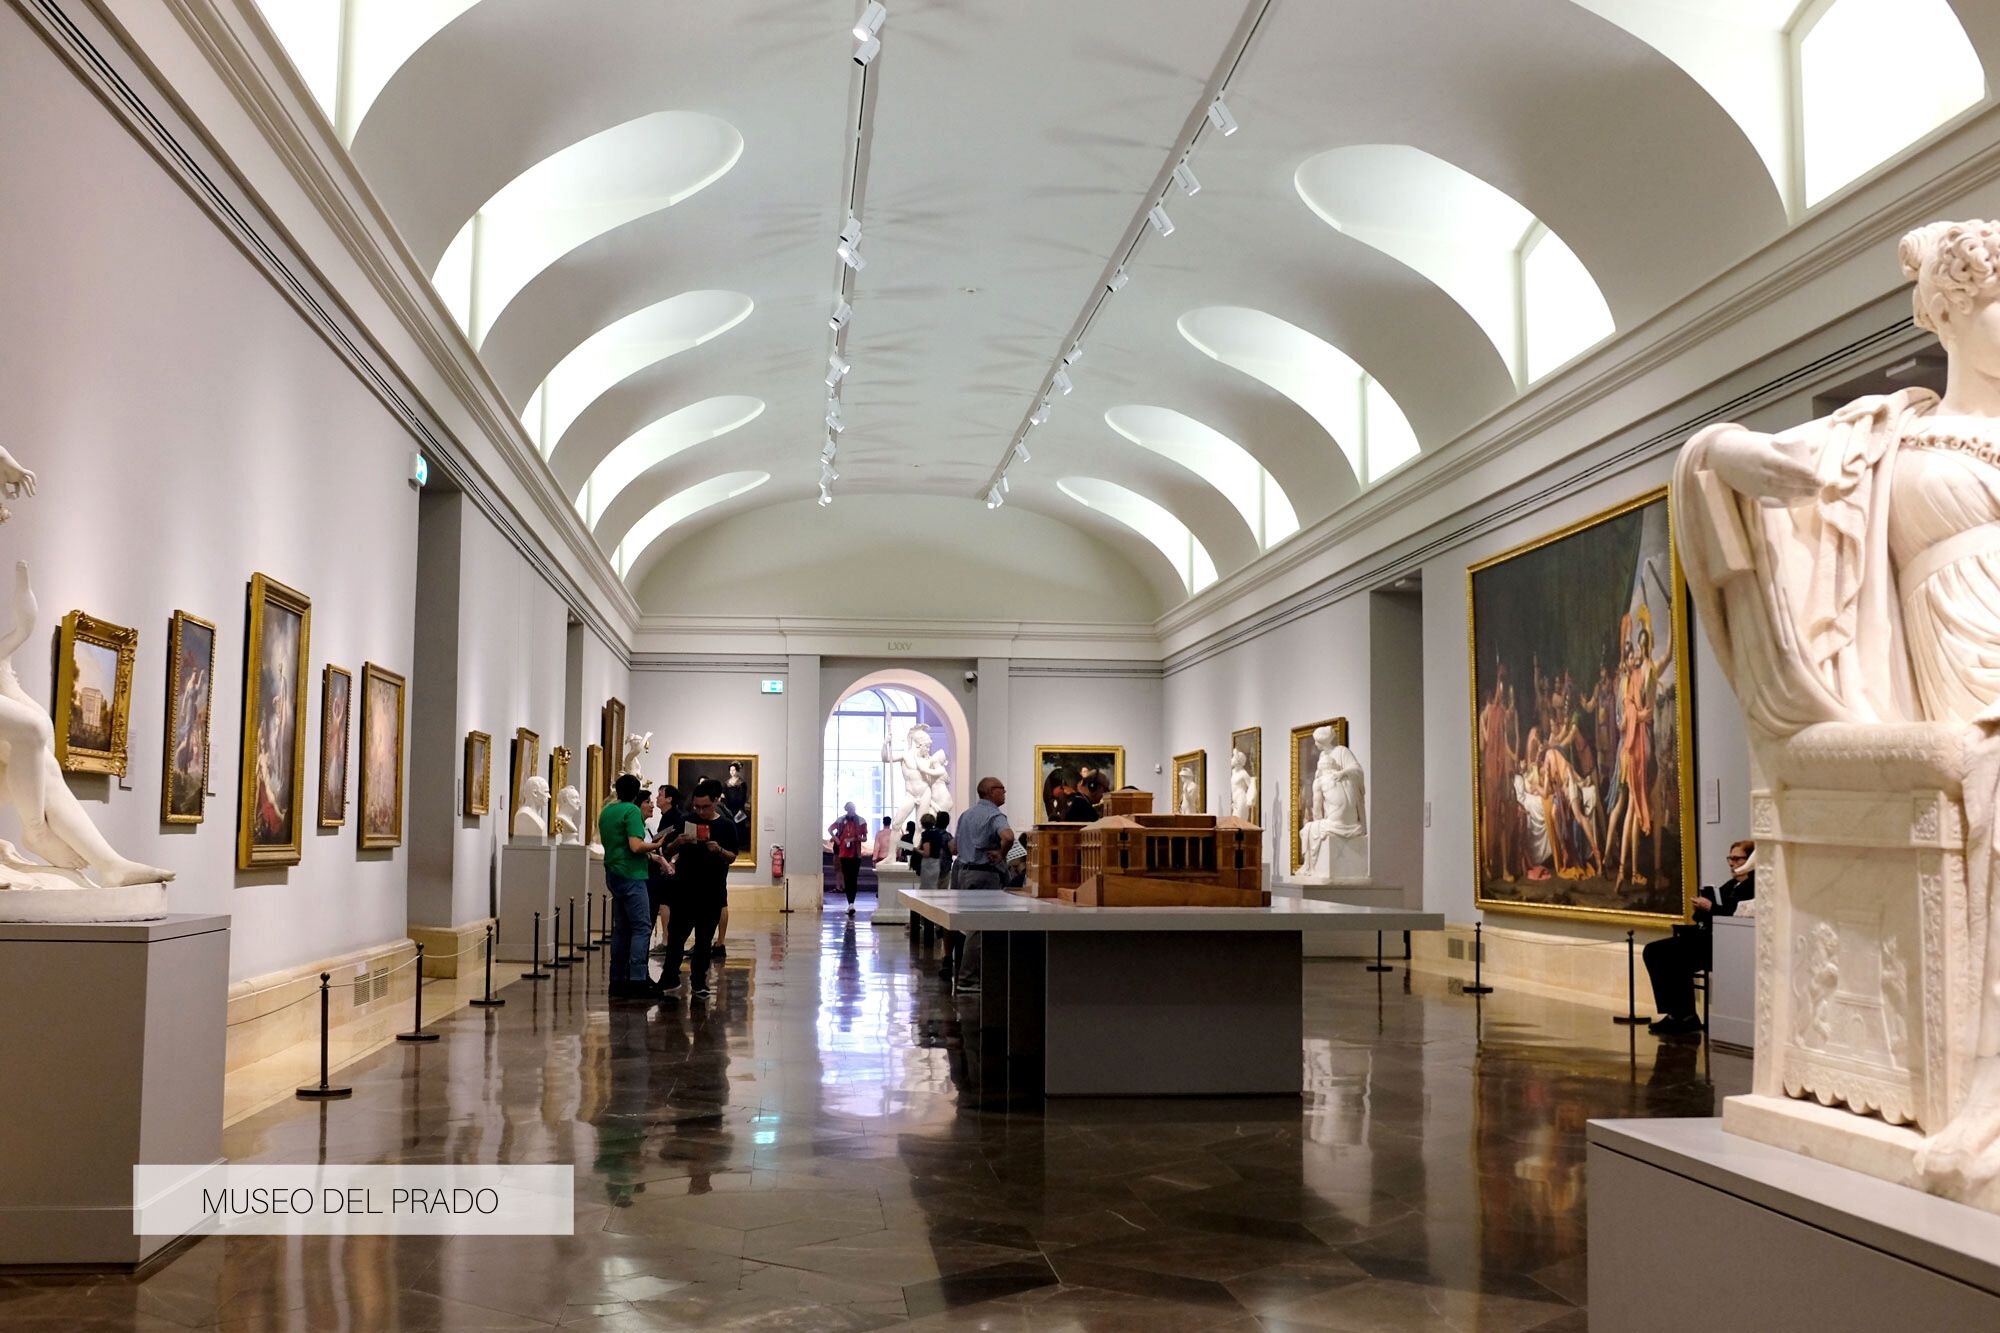 interior of a room in the Museo del Prado; there are paintings on the walls and sculptures along the center of the hallway.